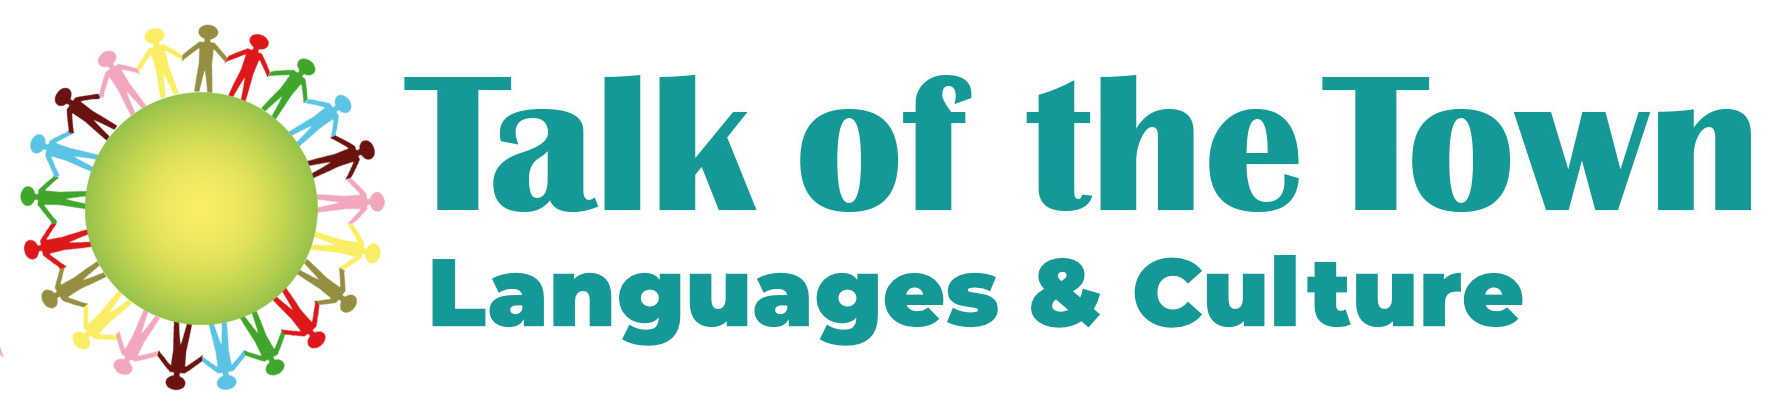 Talk of the Town Languages & Cultural Services